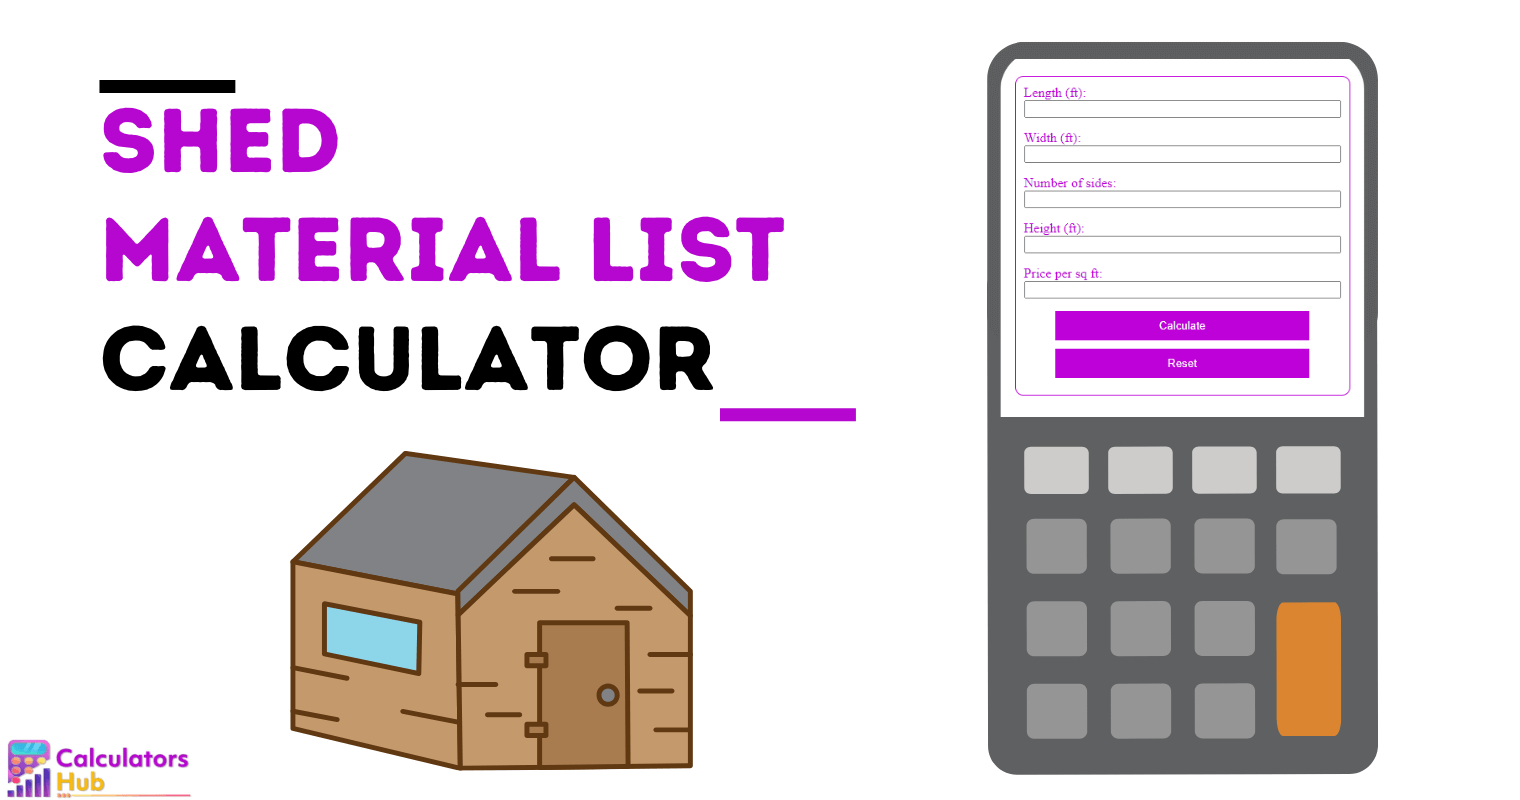 Shed Material List Calculator